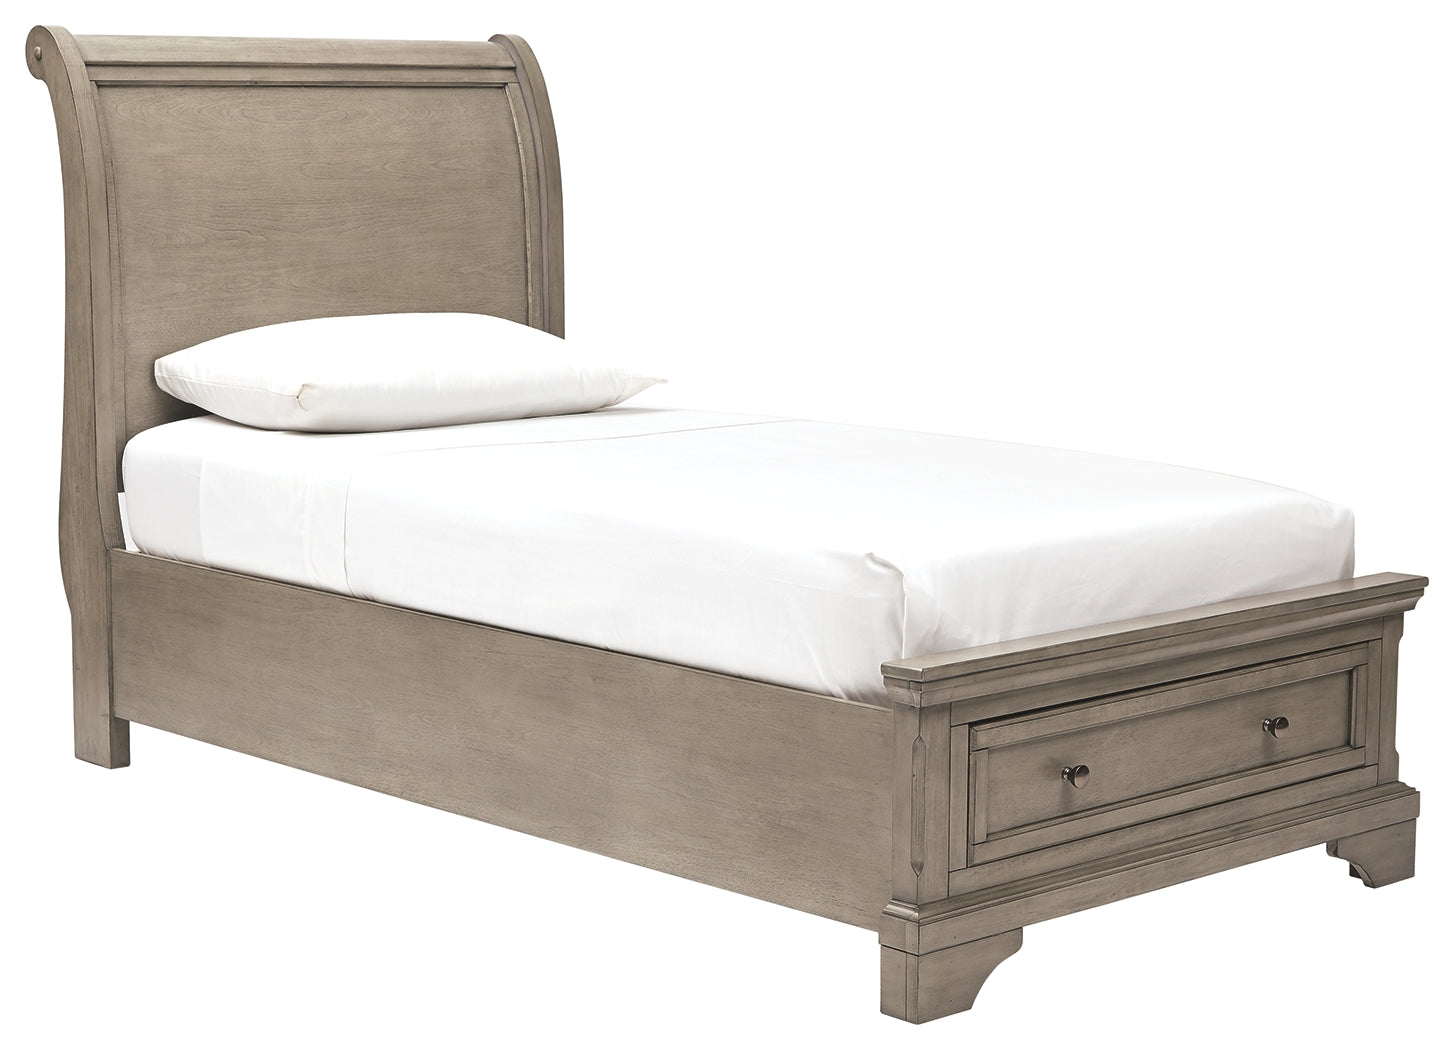 Signature Design by Ashley Lettner Twin Sleigh Bed